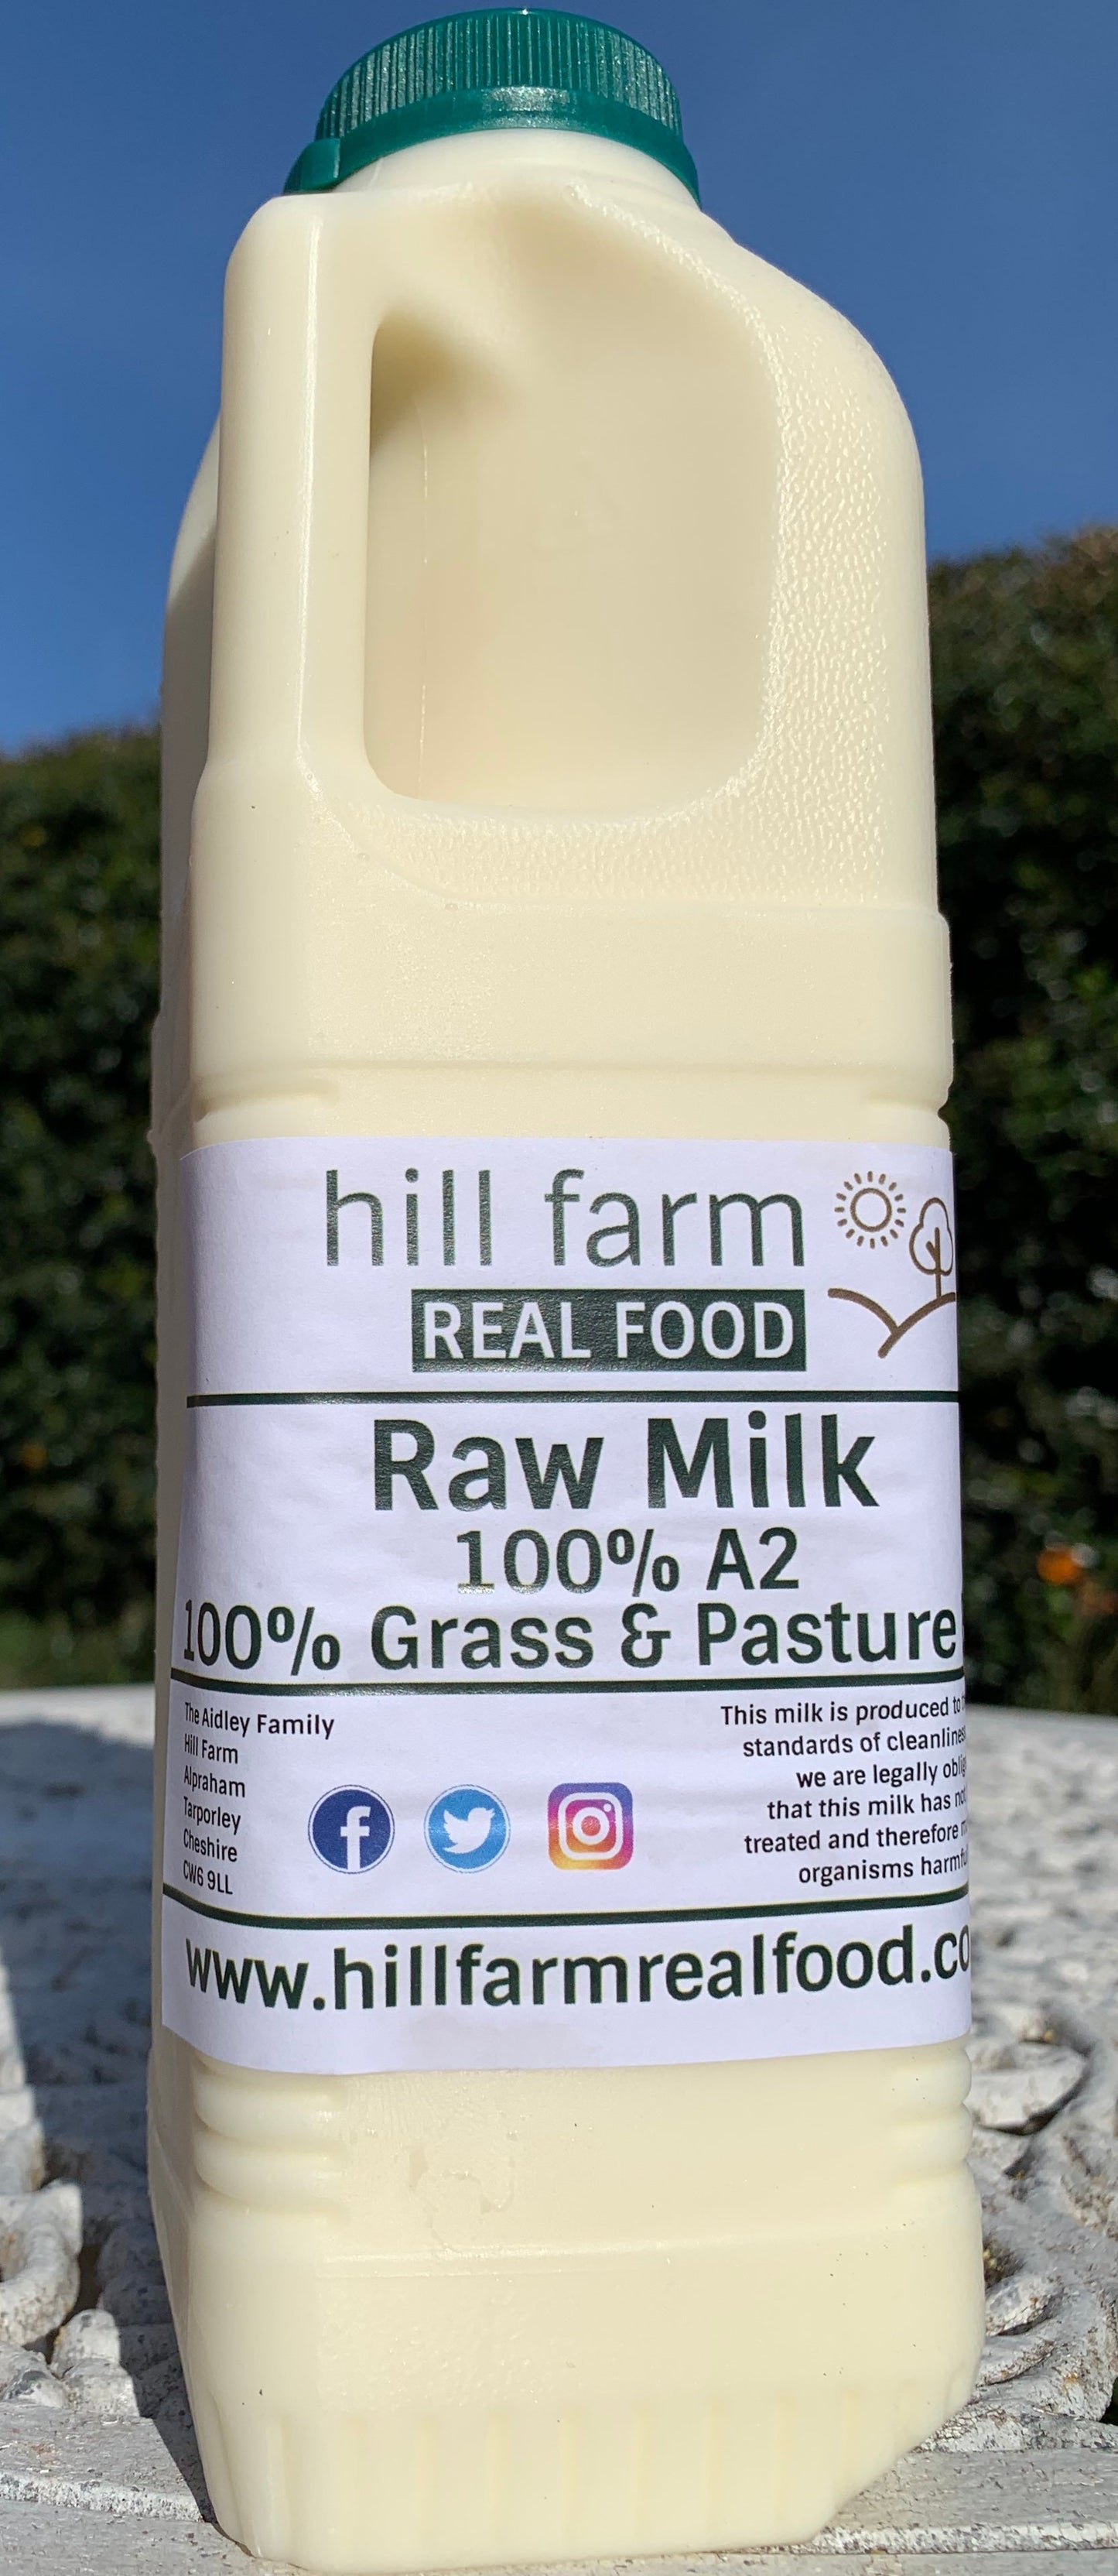 Raw Organic A2 Grass Fed Milk - 6 x 1 litre bottle bundle (INCLUDES COURIER DELIVERY)